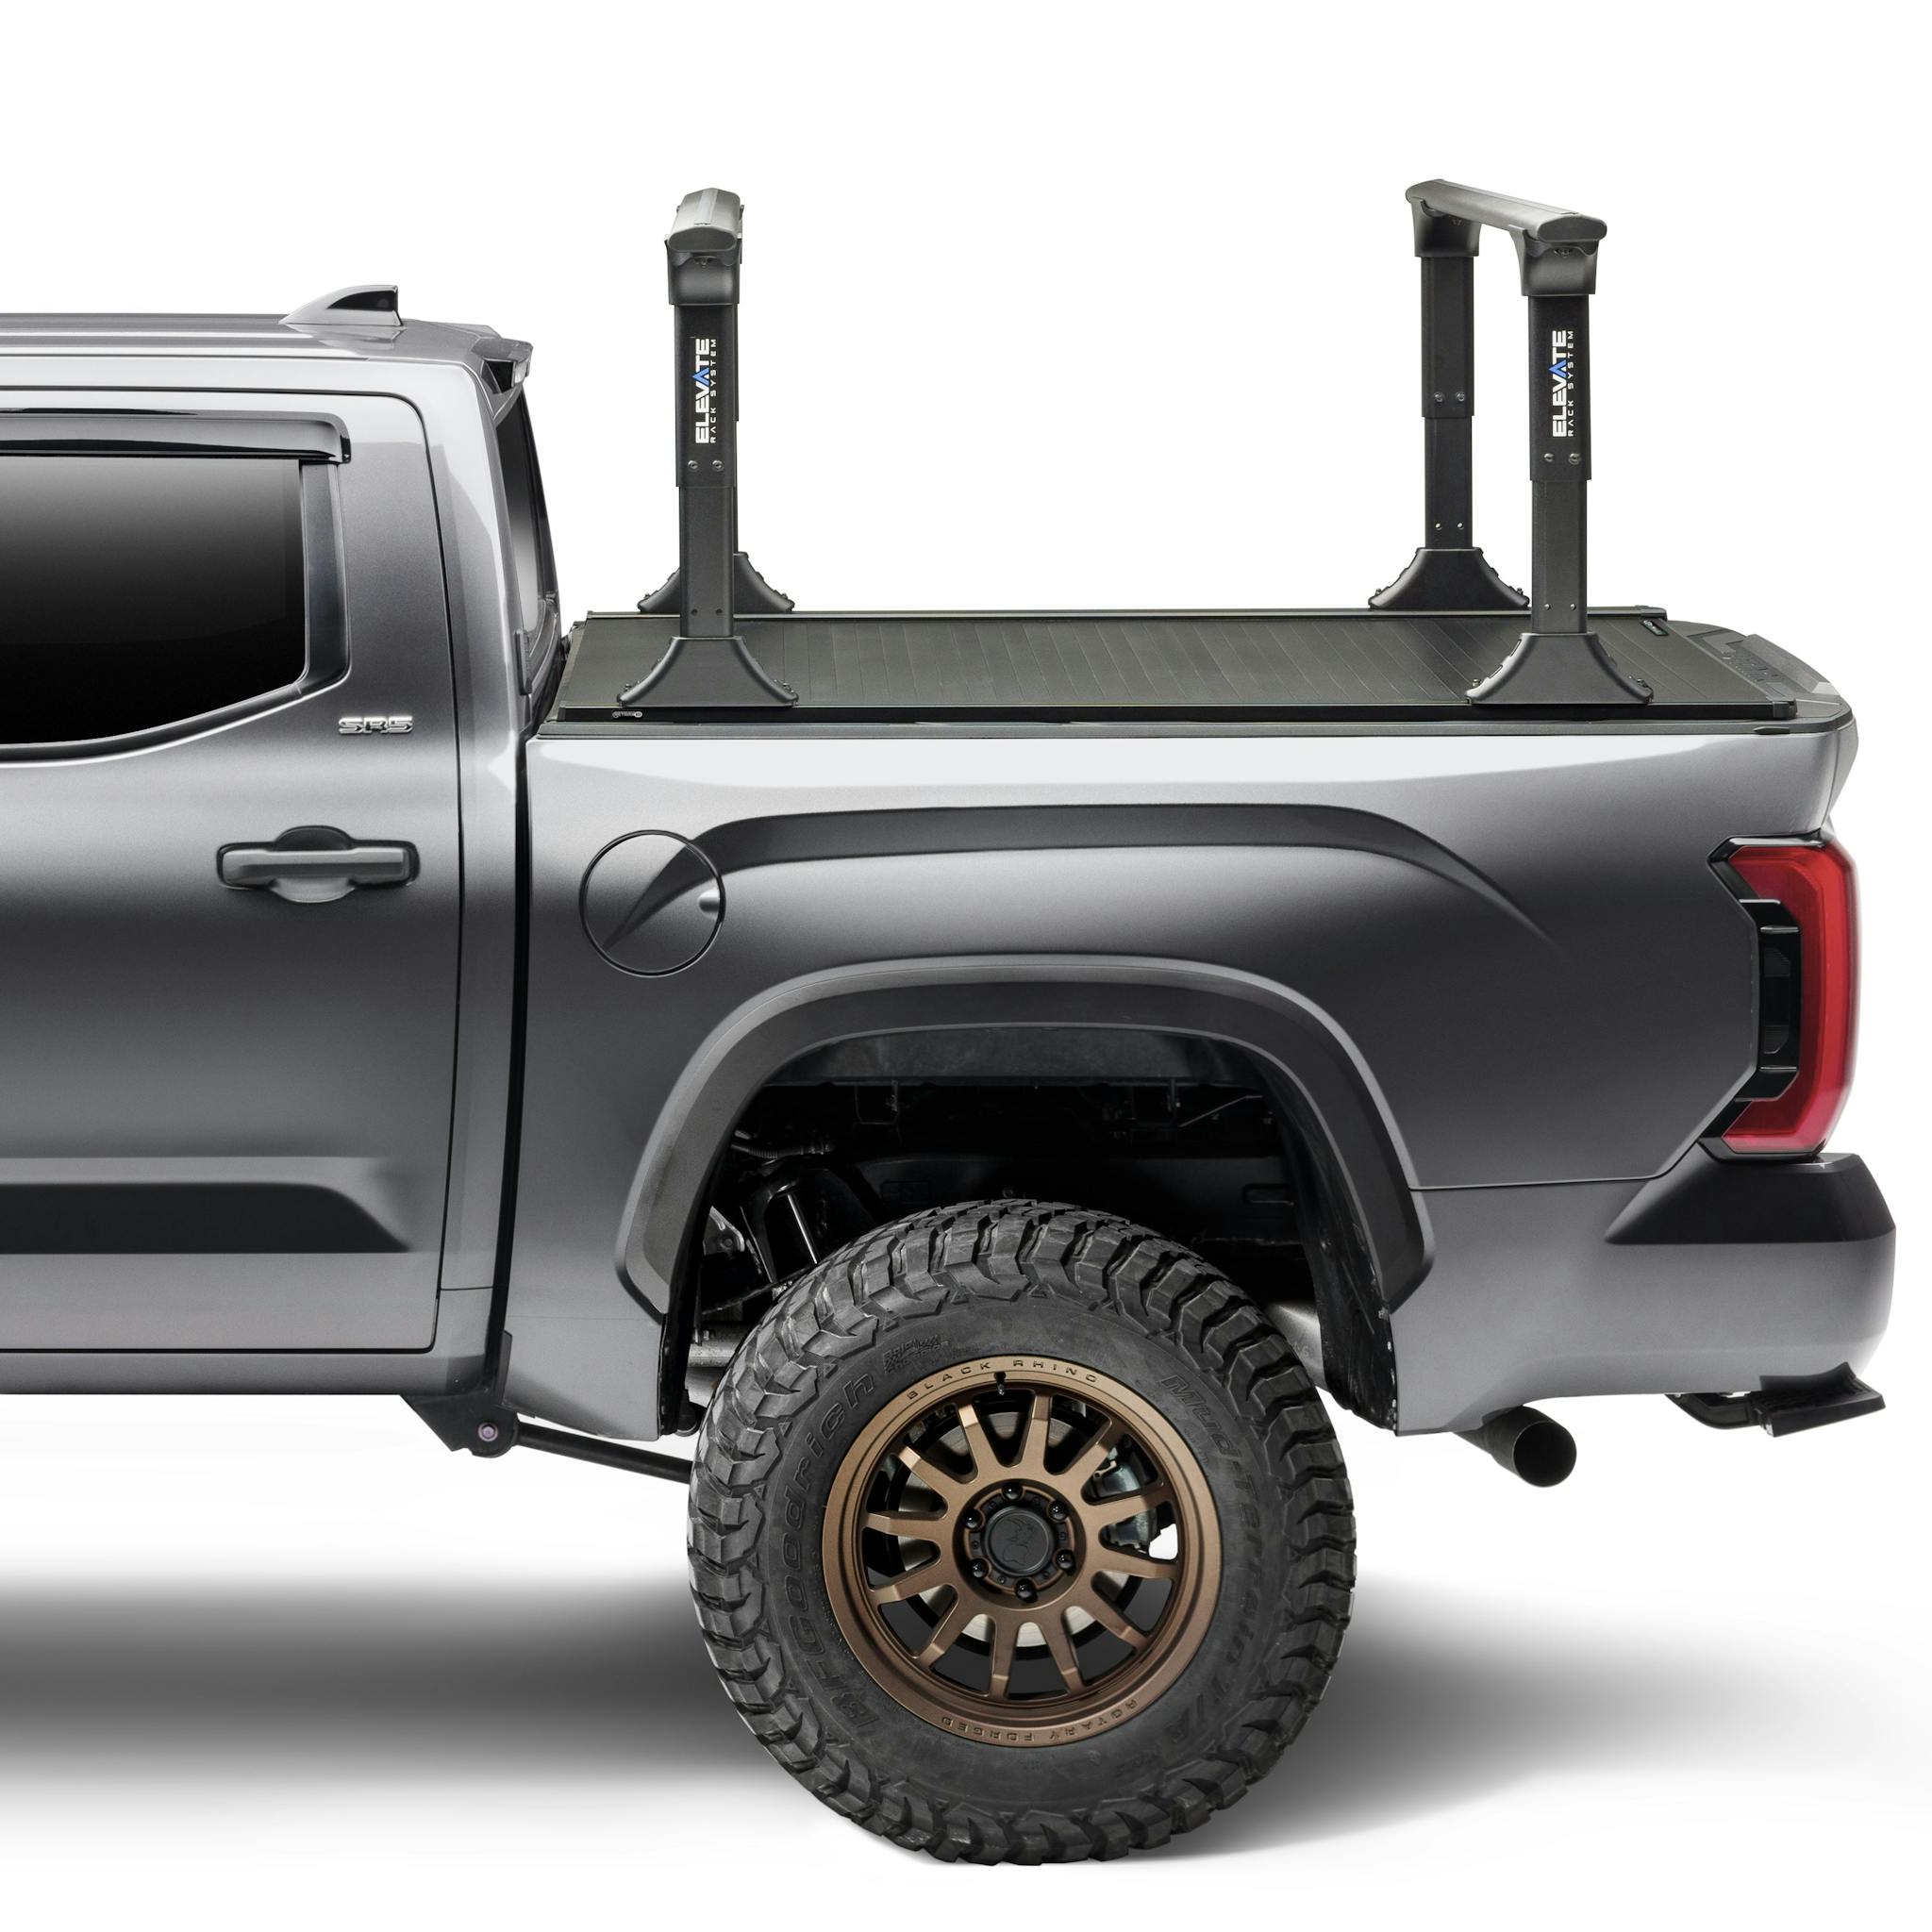 RetraxPro XR Tonneau Cover and TruXedo Elevate Truck Rack Package